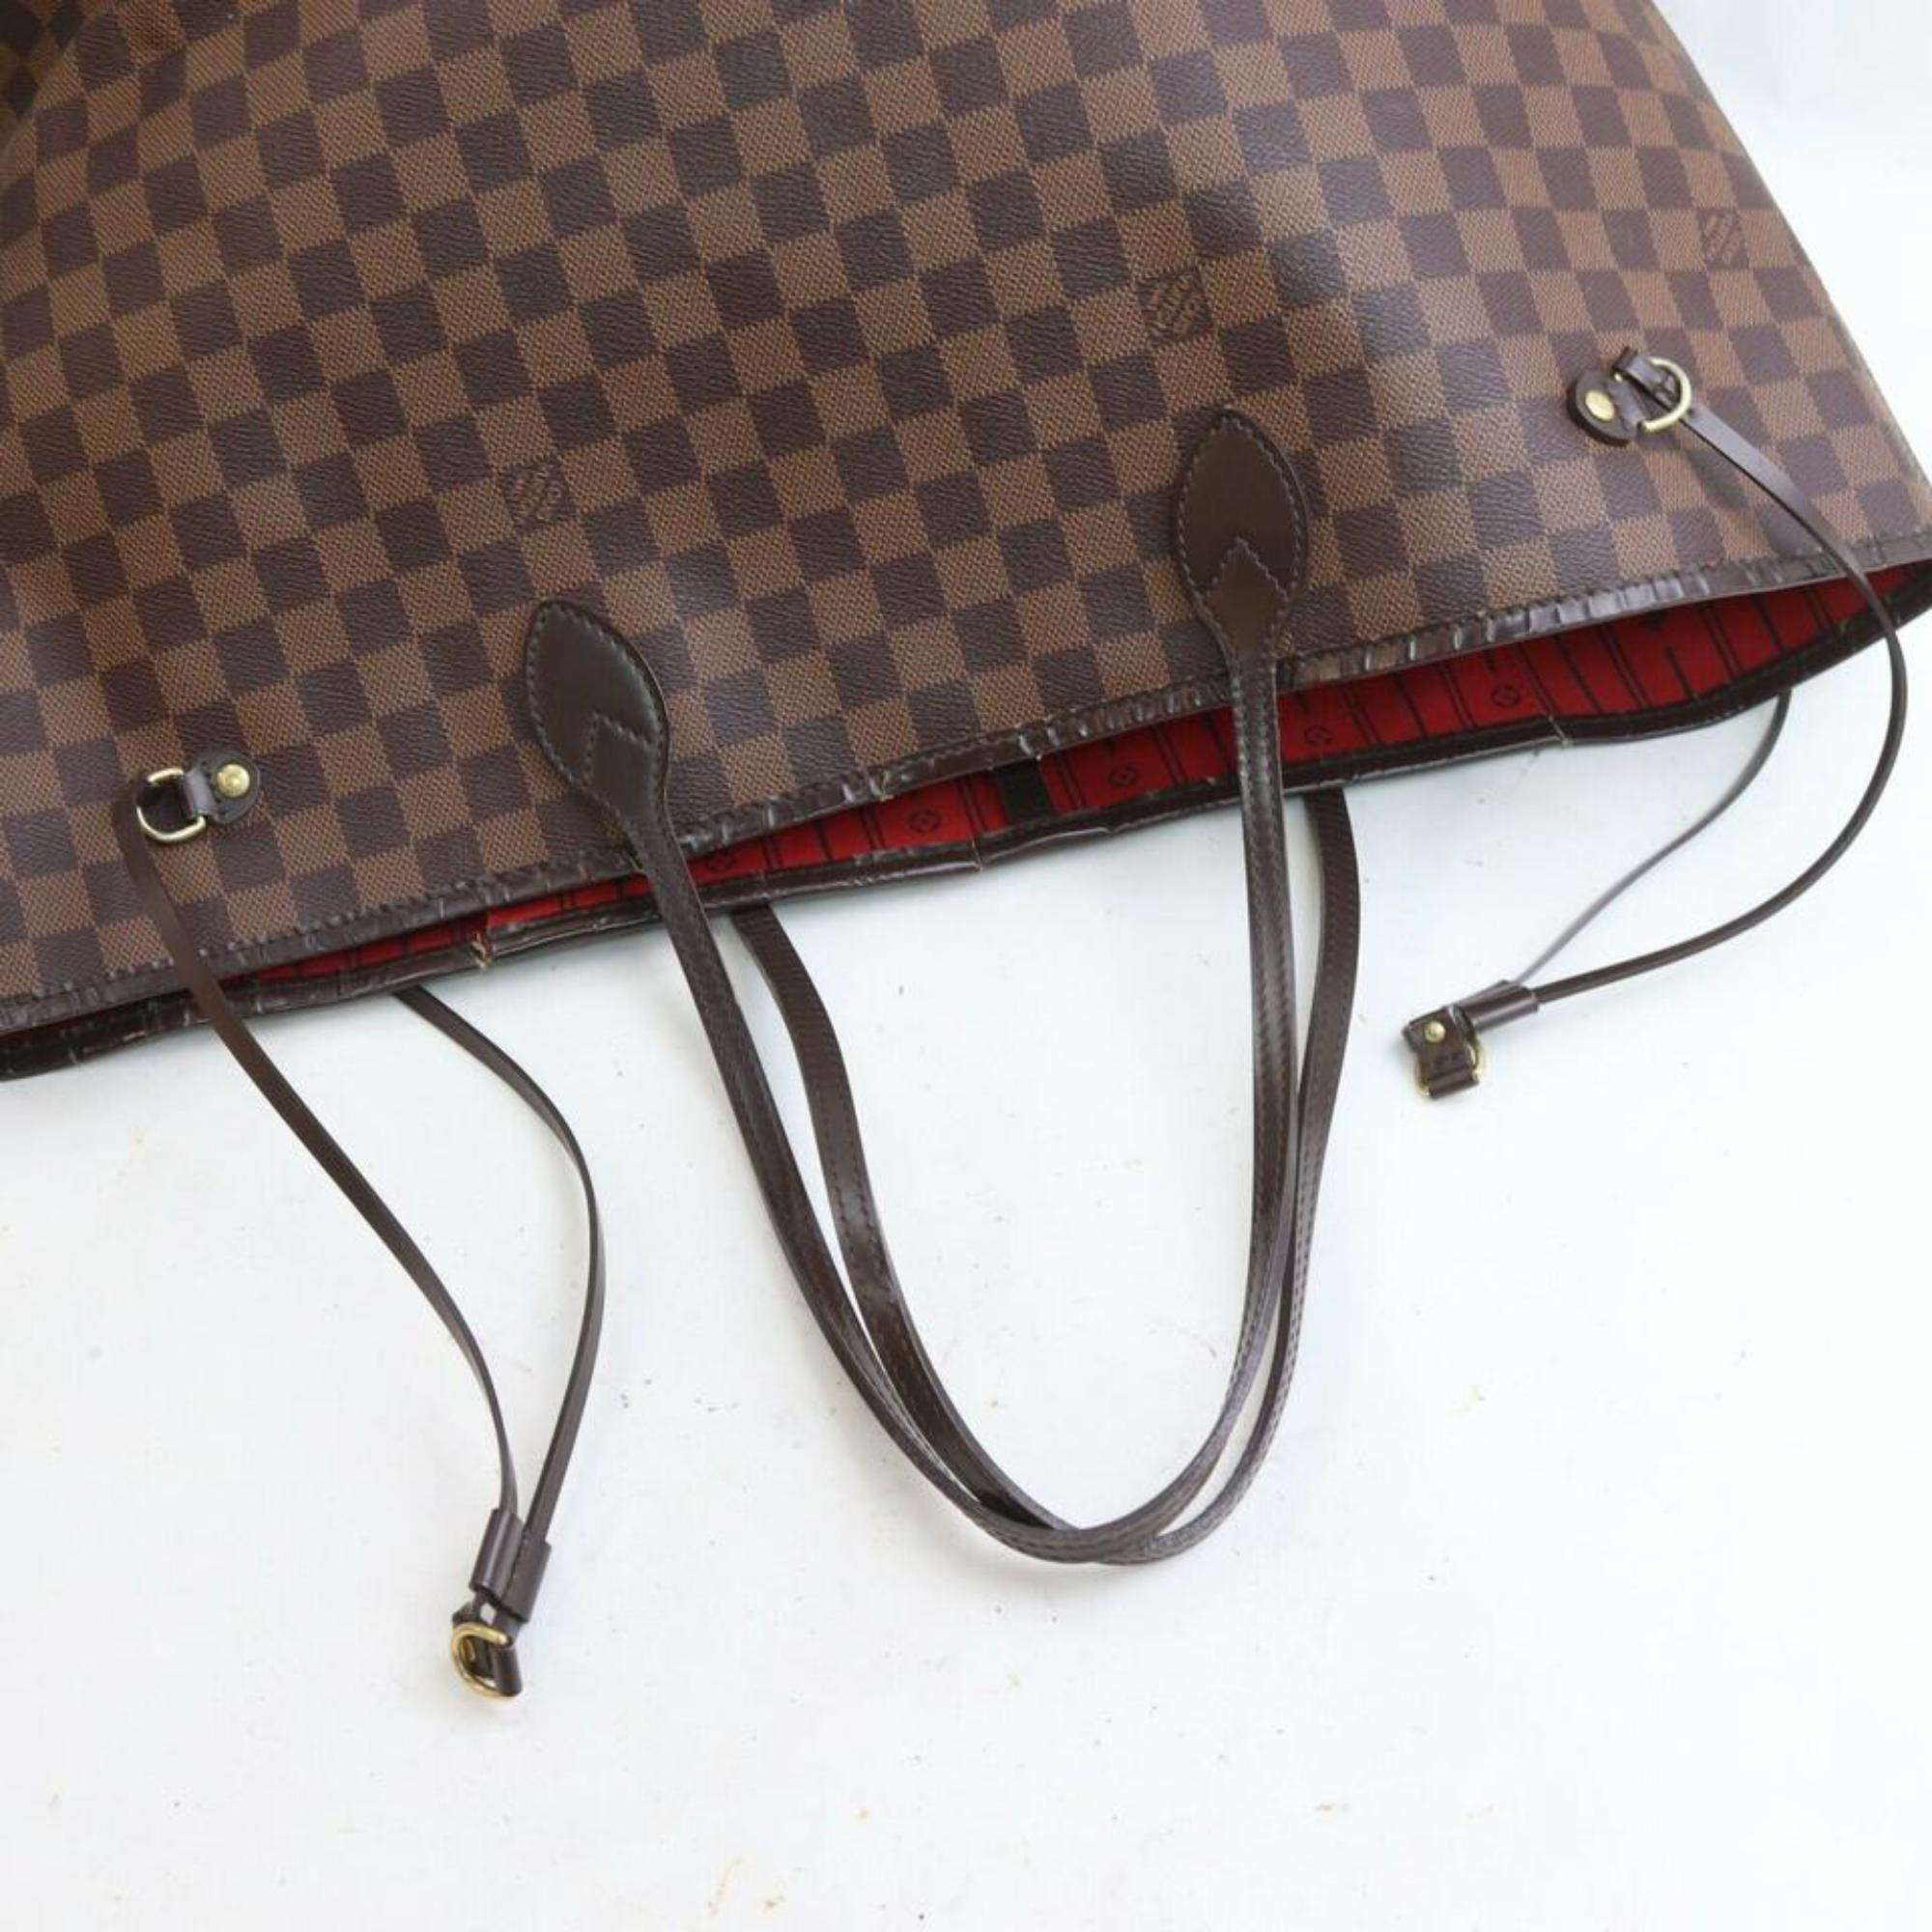 Louis Vuitton Large Damier Ebene Neverfull GM Tote bag 2LVL1223
Date Code/Serial Number: Fl0130
Made In: France
Measurements: Length:  21